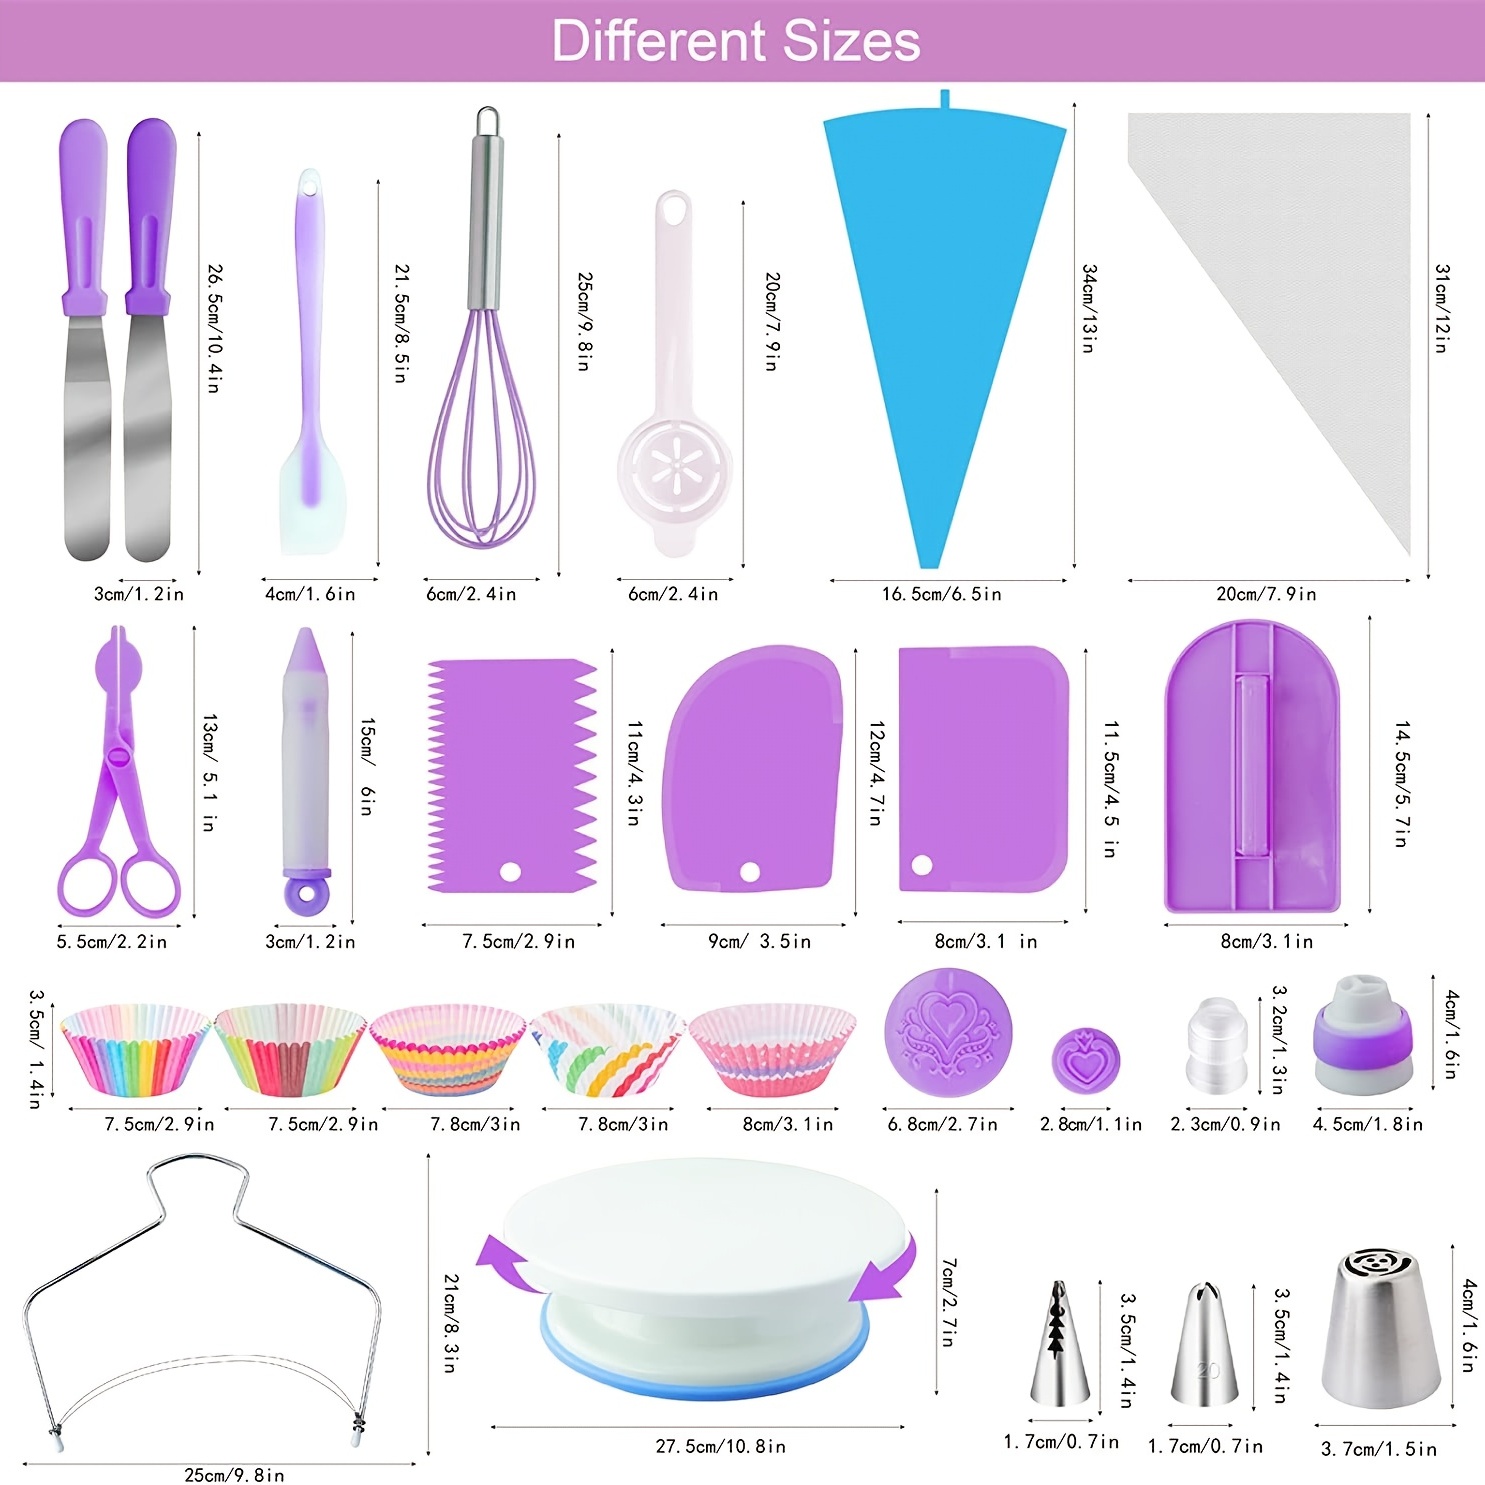 The Best Cake Decorating Tools: A Foodal Buying Guide